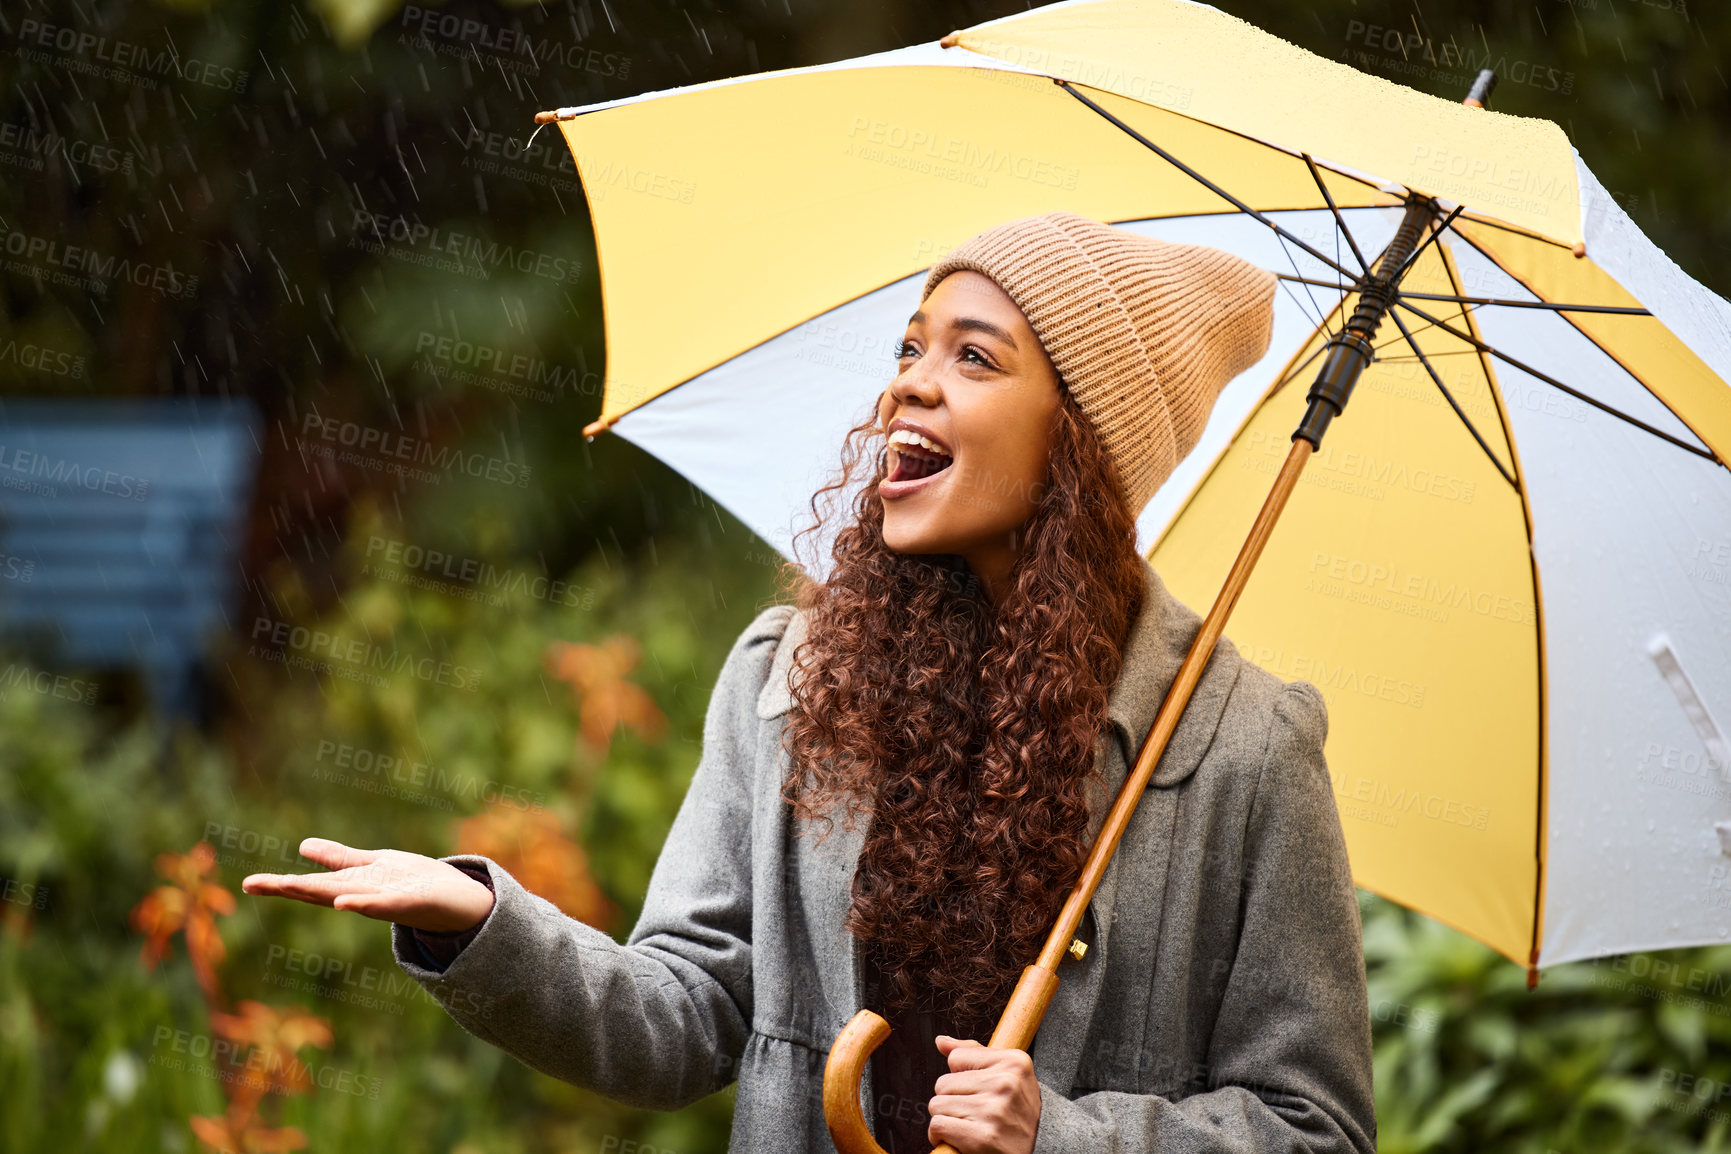 Buy stock photo Shot of a young woman standing in the rain with an umbrella